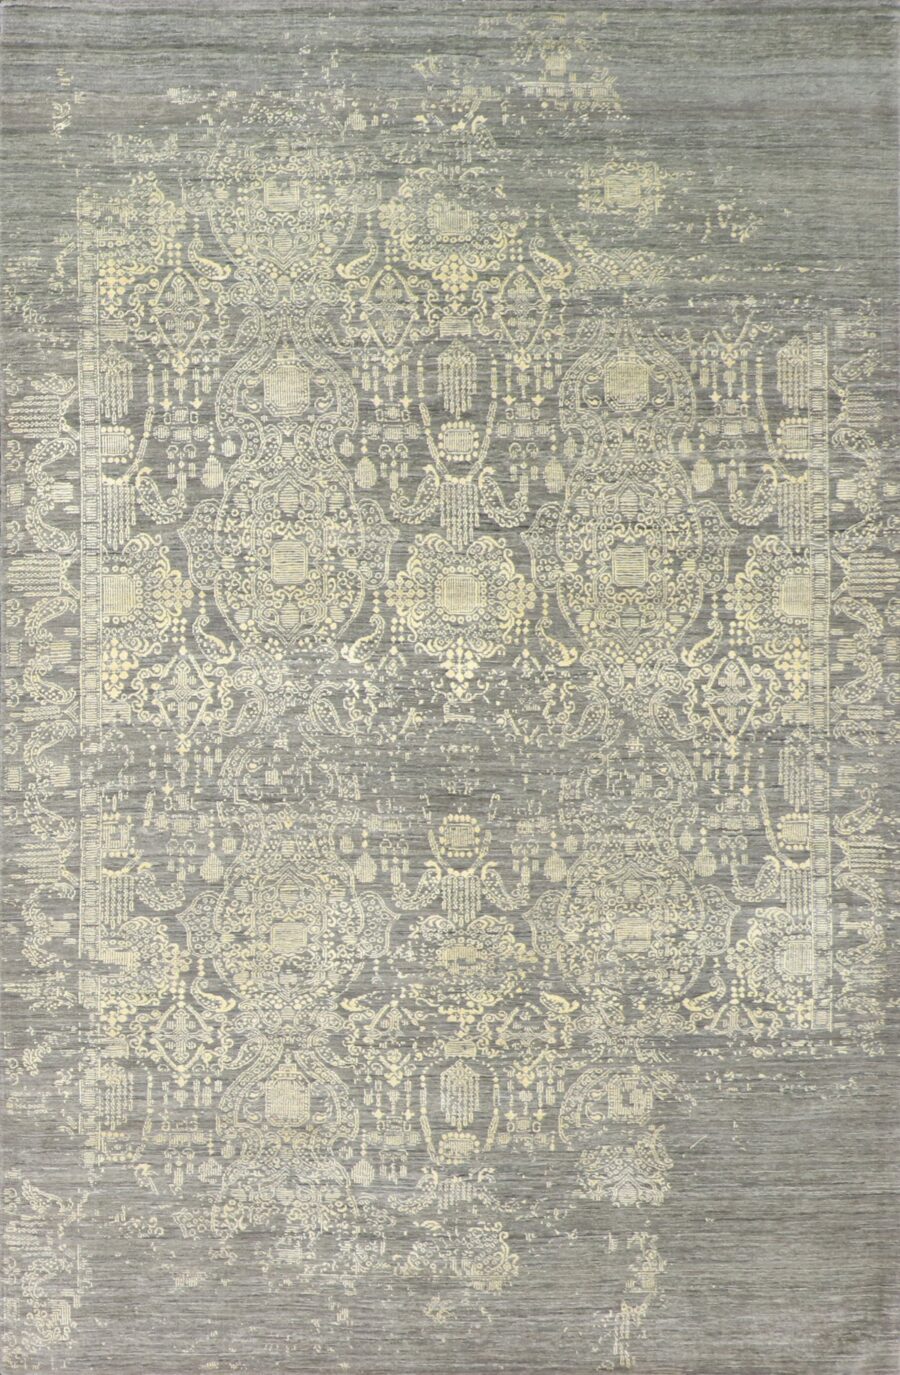 6’1”x9’1” Transitional Gray Wool & Silk Hand-Knotted Rug - Direct Rug Import | Rugs in Chicago, Indiana,South Bend,Granger